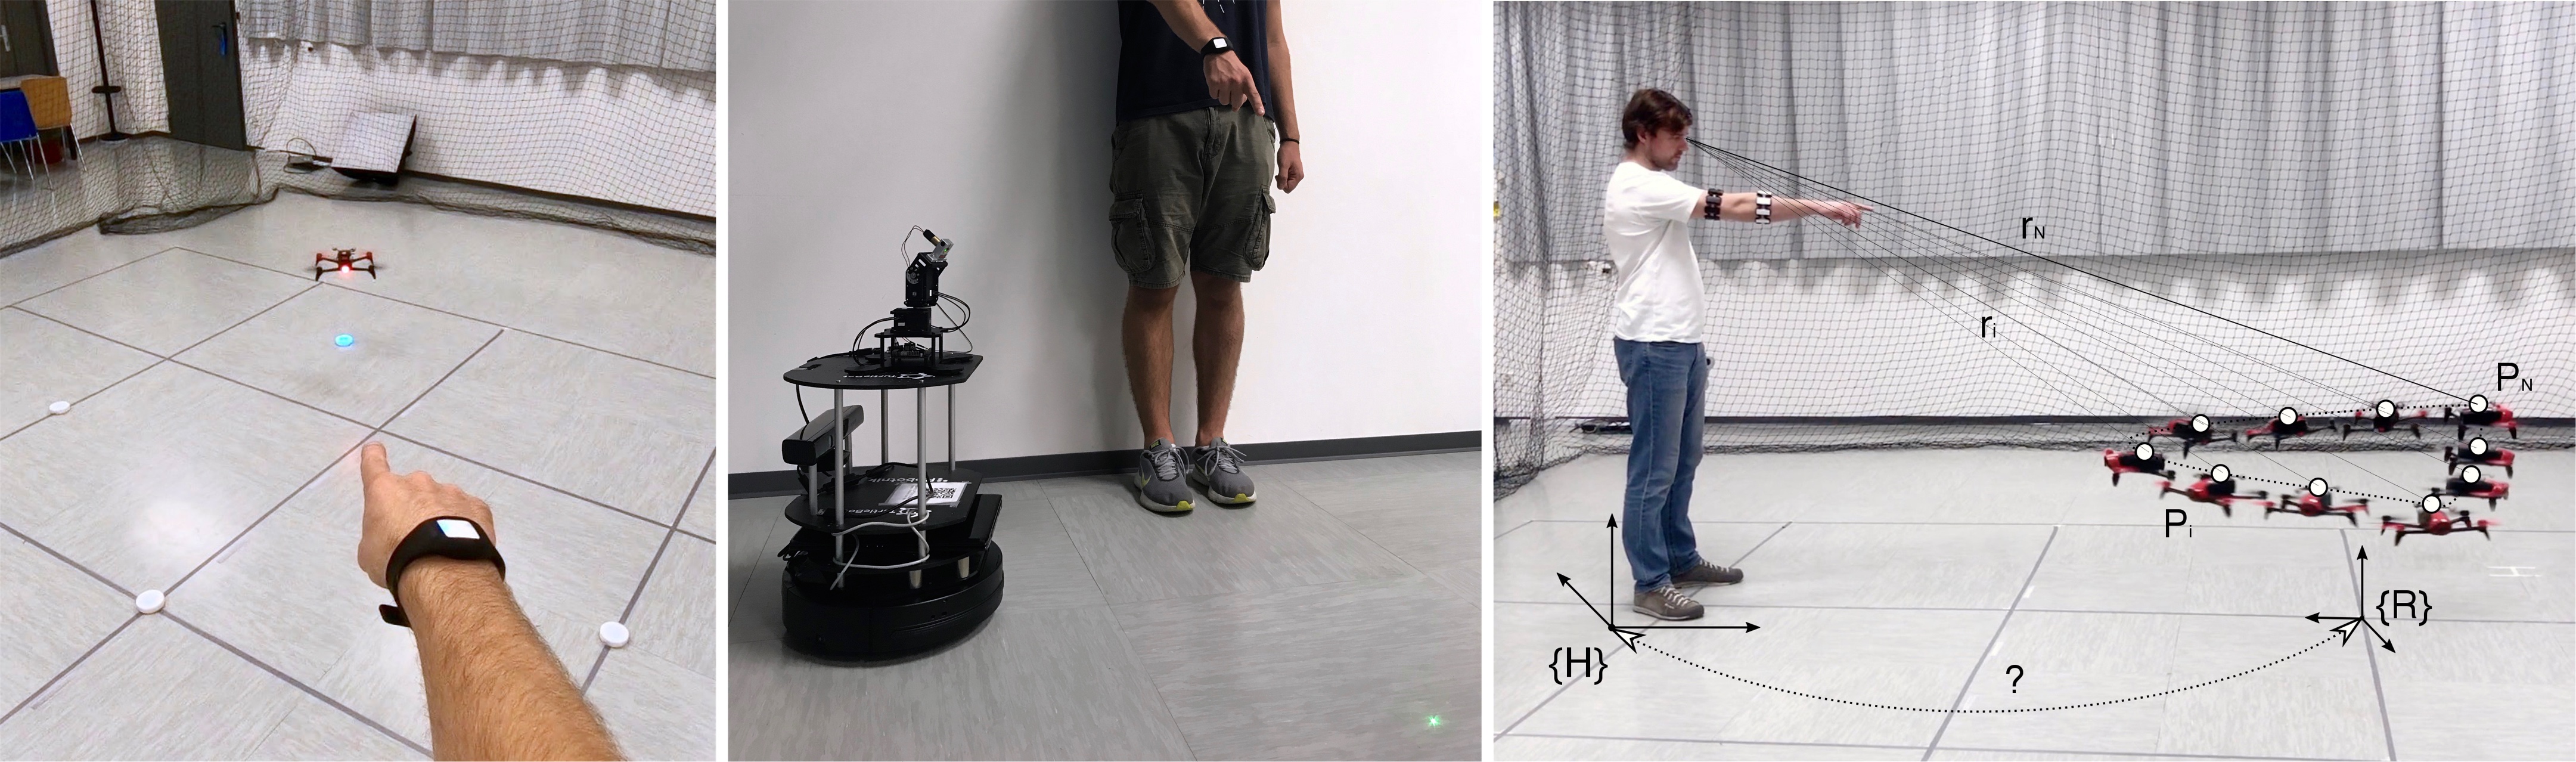 Research on Human-Robot Interaction using Pointing Gestures